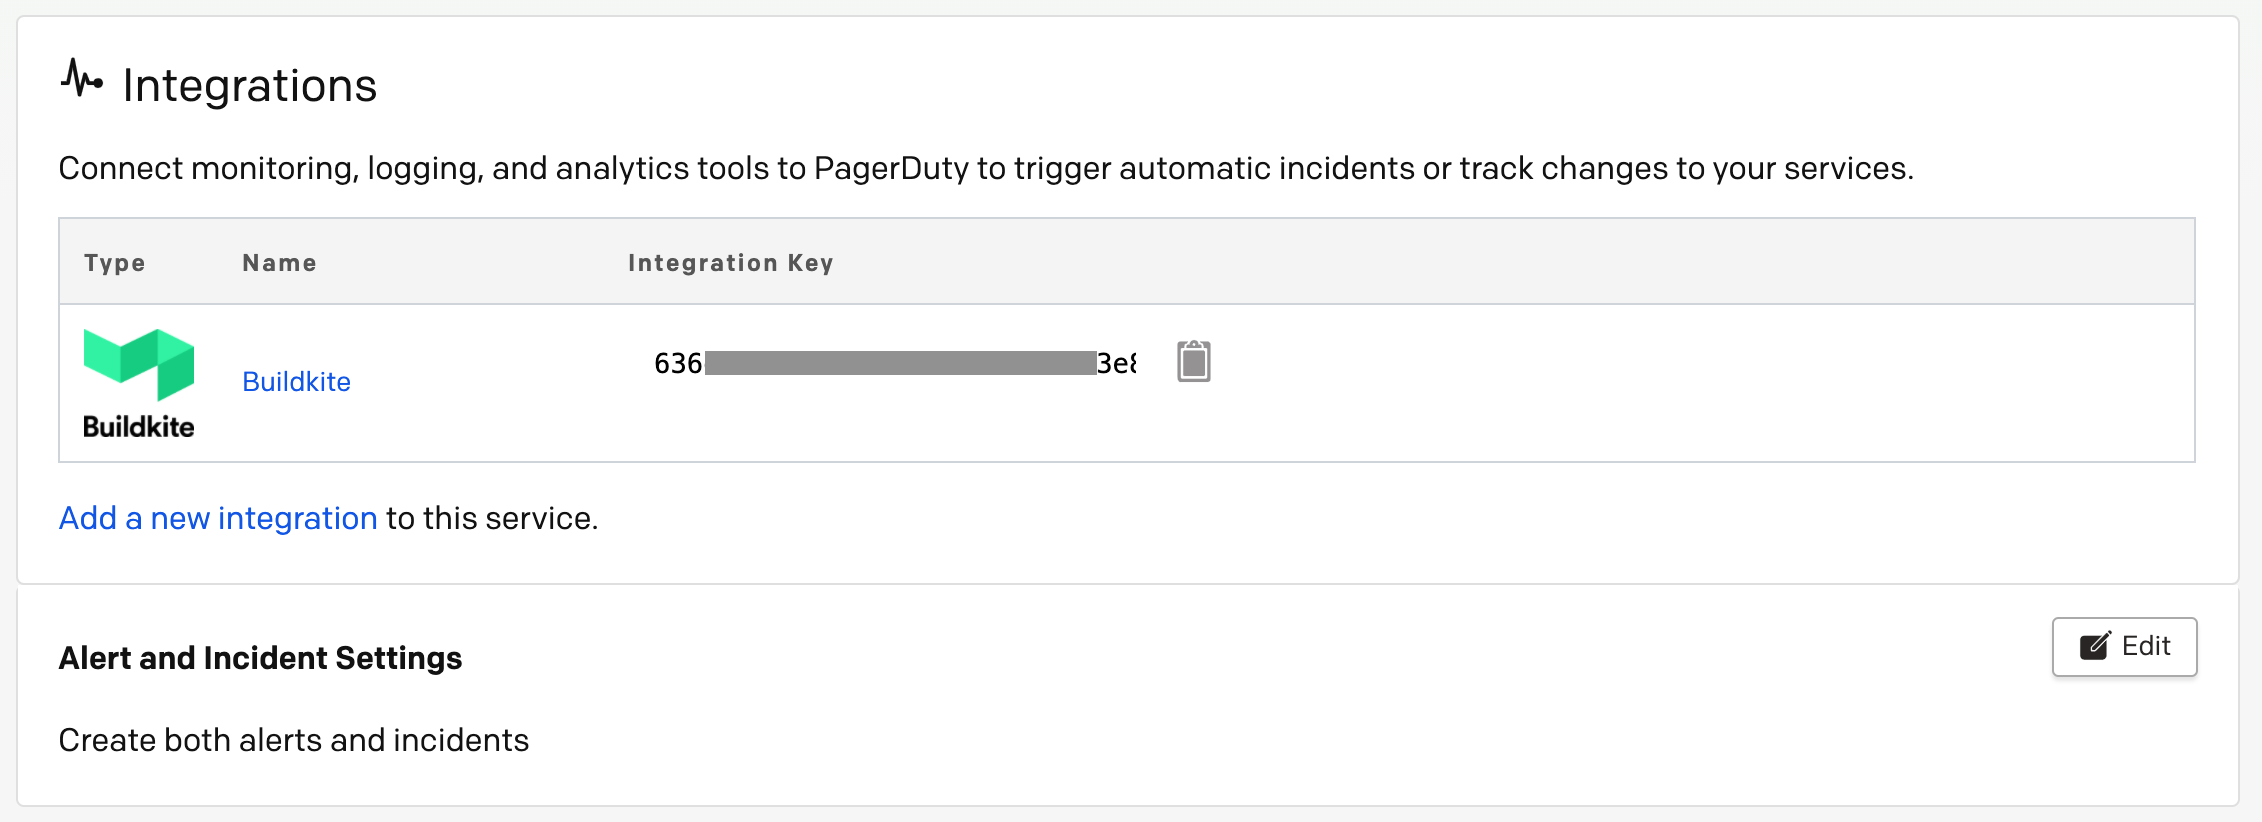 Screenshot of the Buildkite integration in PagerDuty